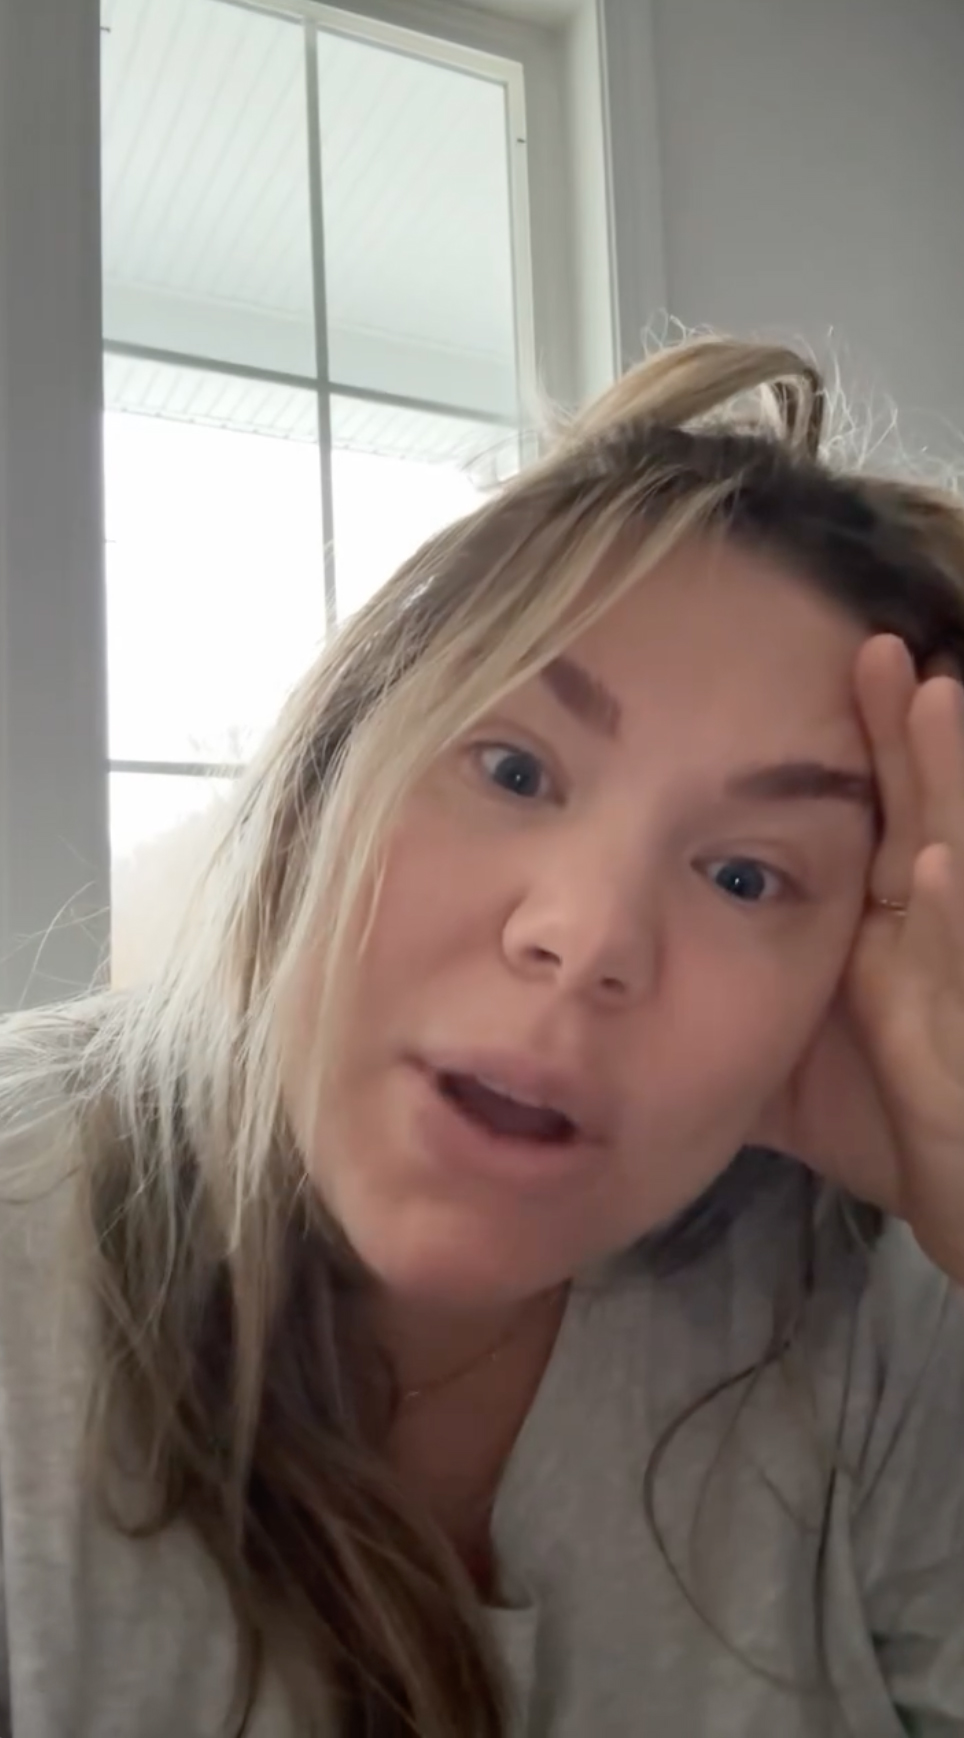 Kailyn showed off her messy pigtails in a new video